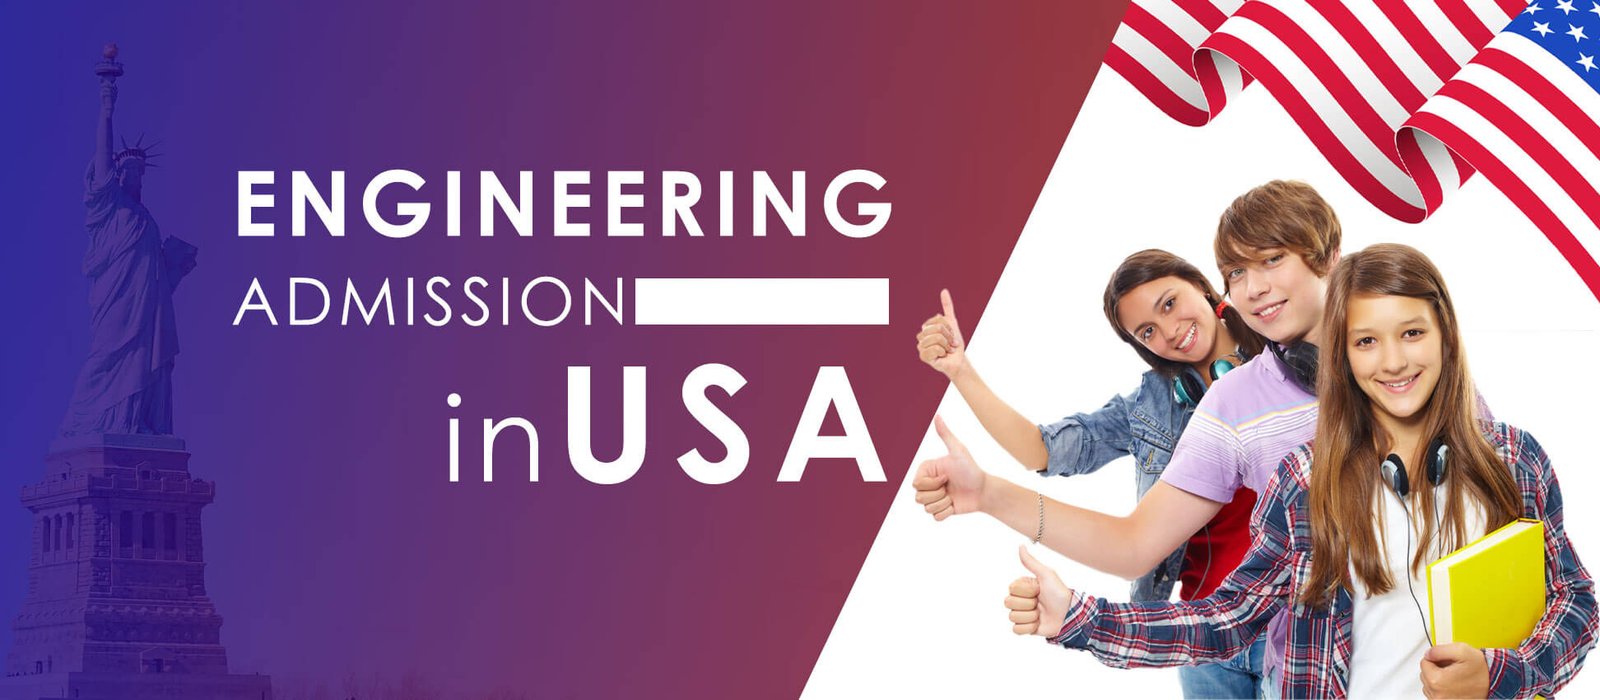 Engineering Admission in USA